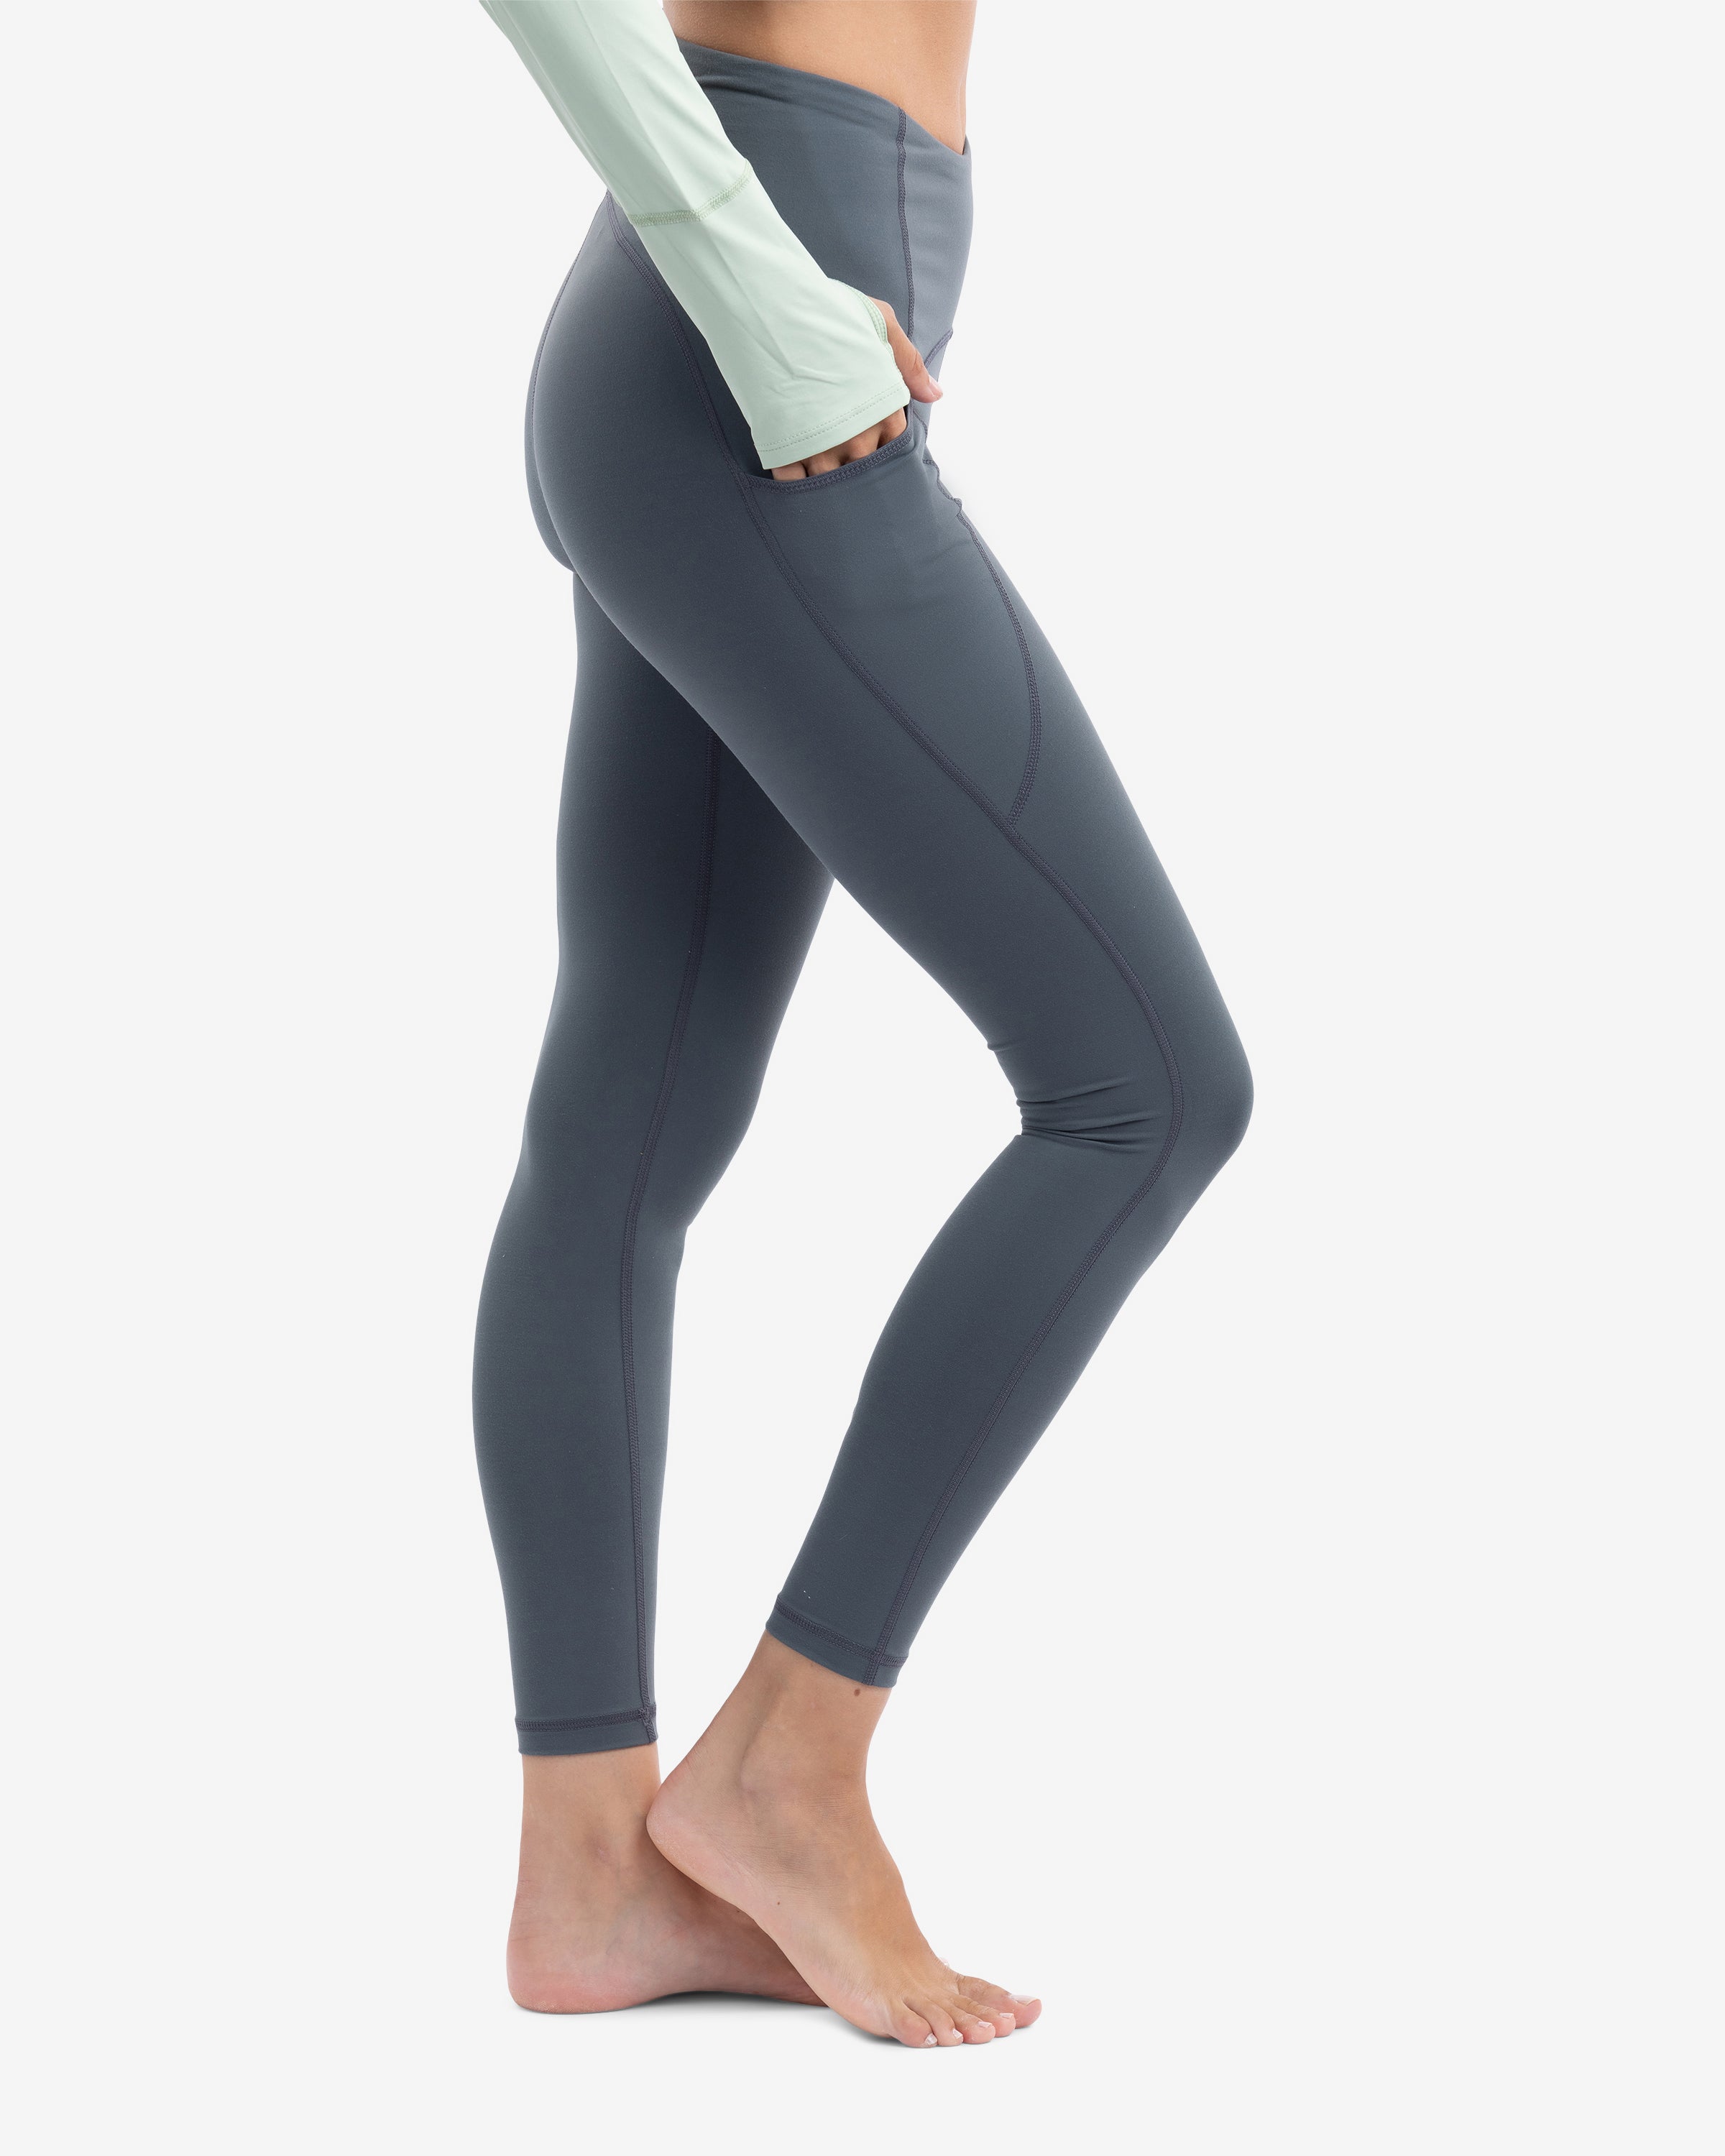 Fabrics 101: Airlift – The Ultra-Slimming Legging Fabric With A